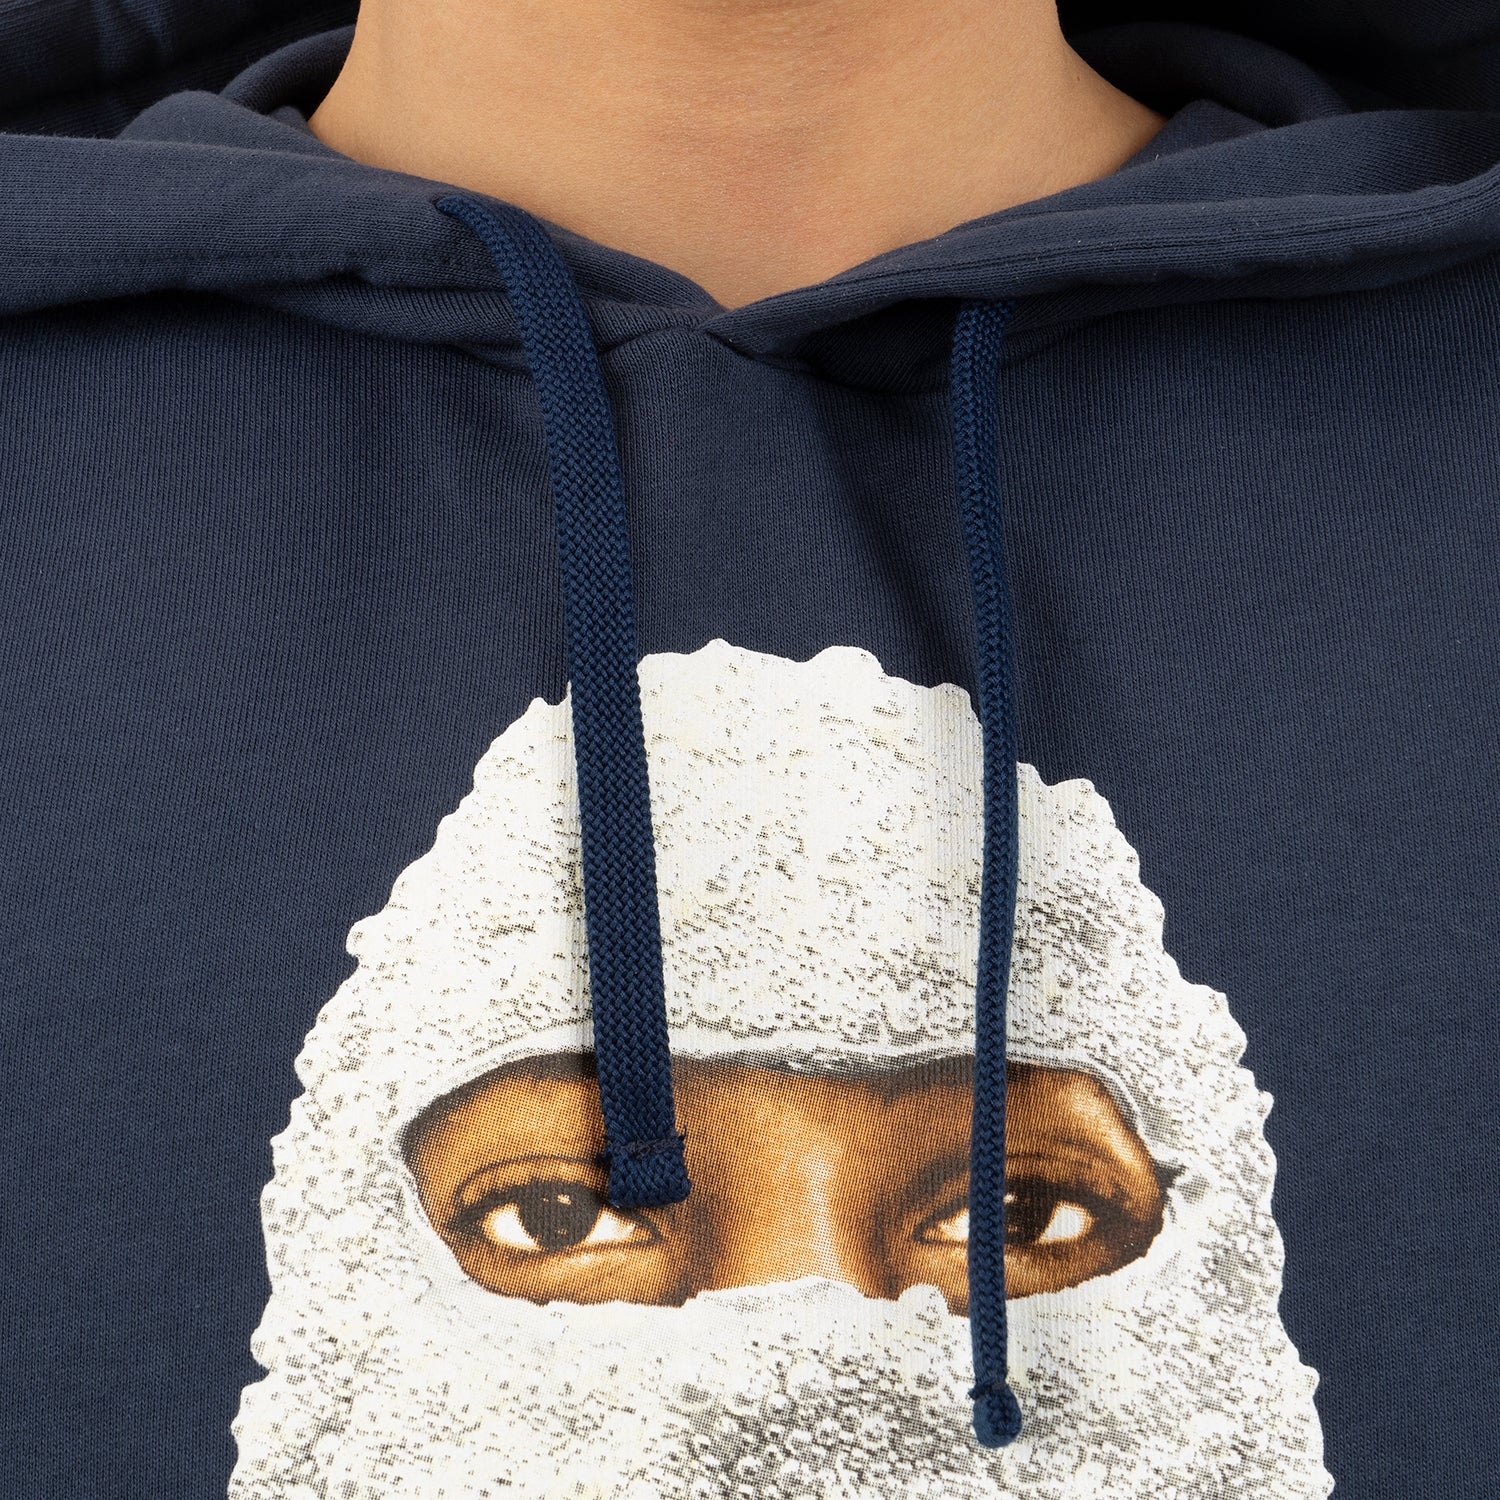 future archive mask hoodie